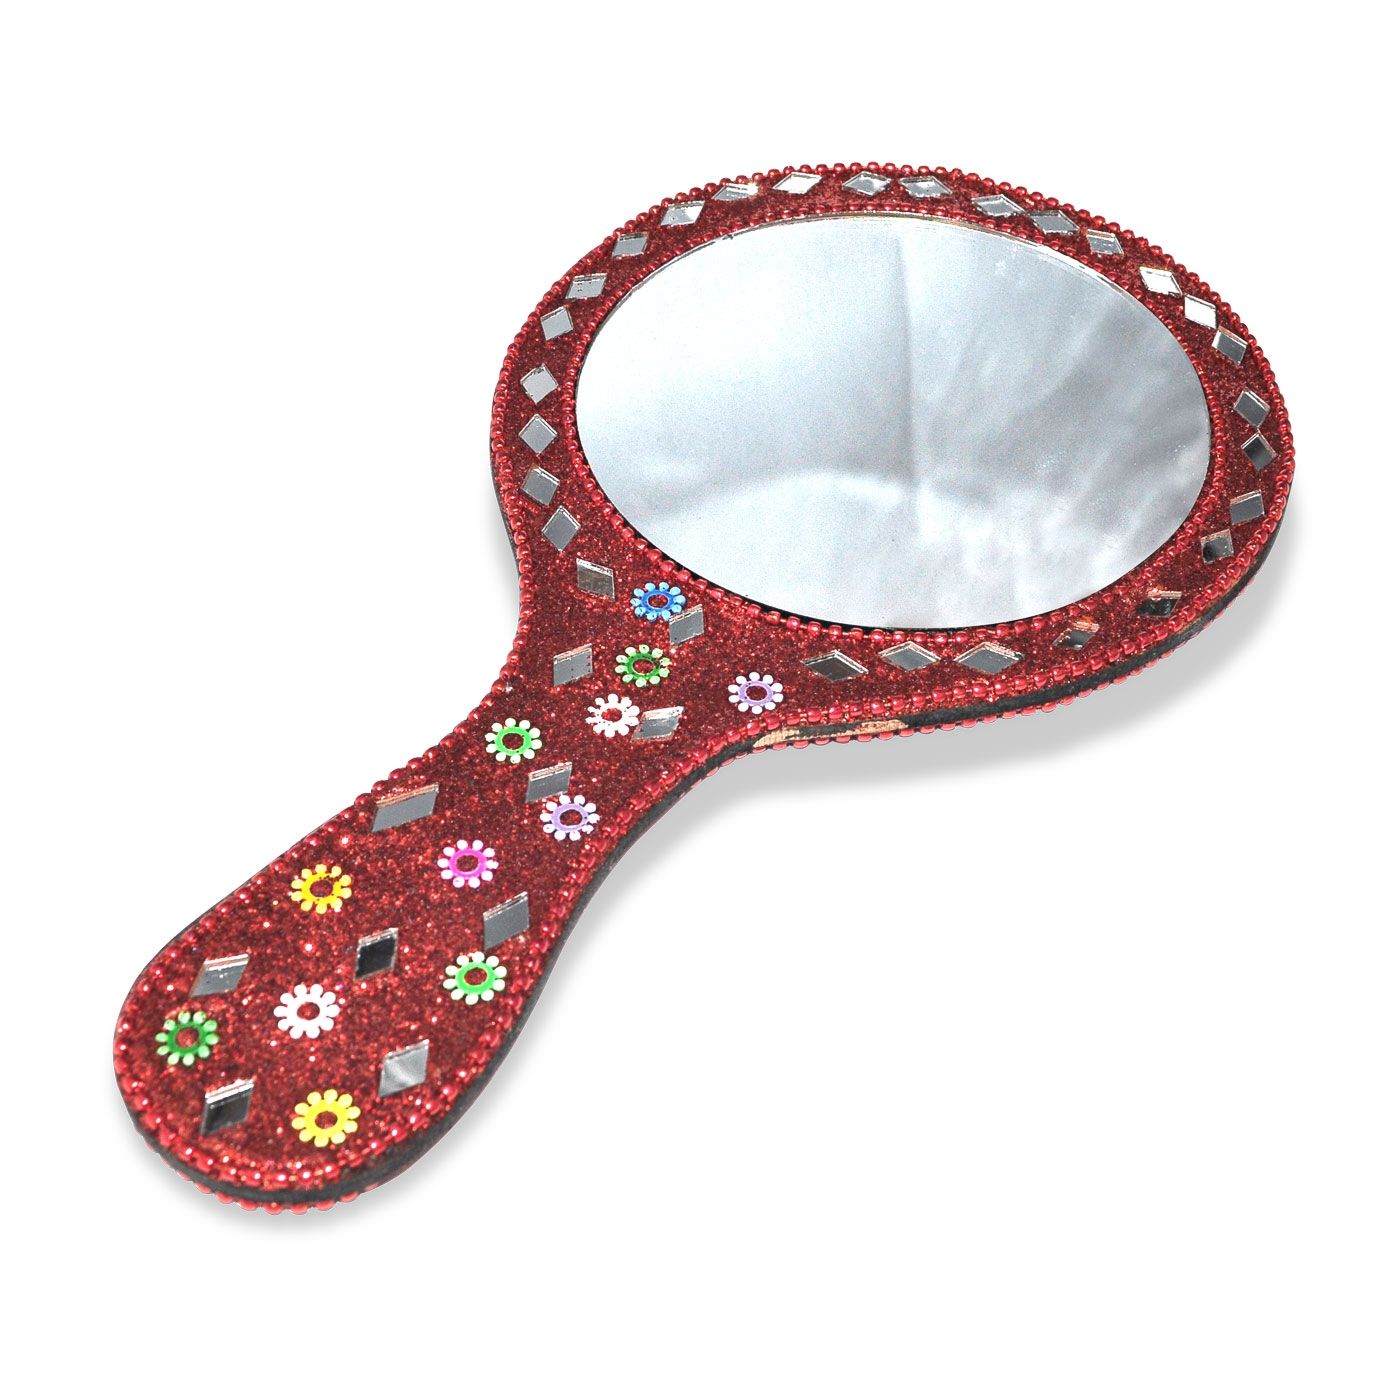 Hand Held Mirror Best Make Up Mirror Hand Mirror Pinterest Throughout Red Mirrors For Sale (View 3 of 15)